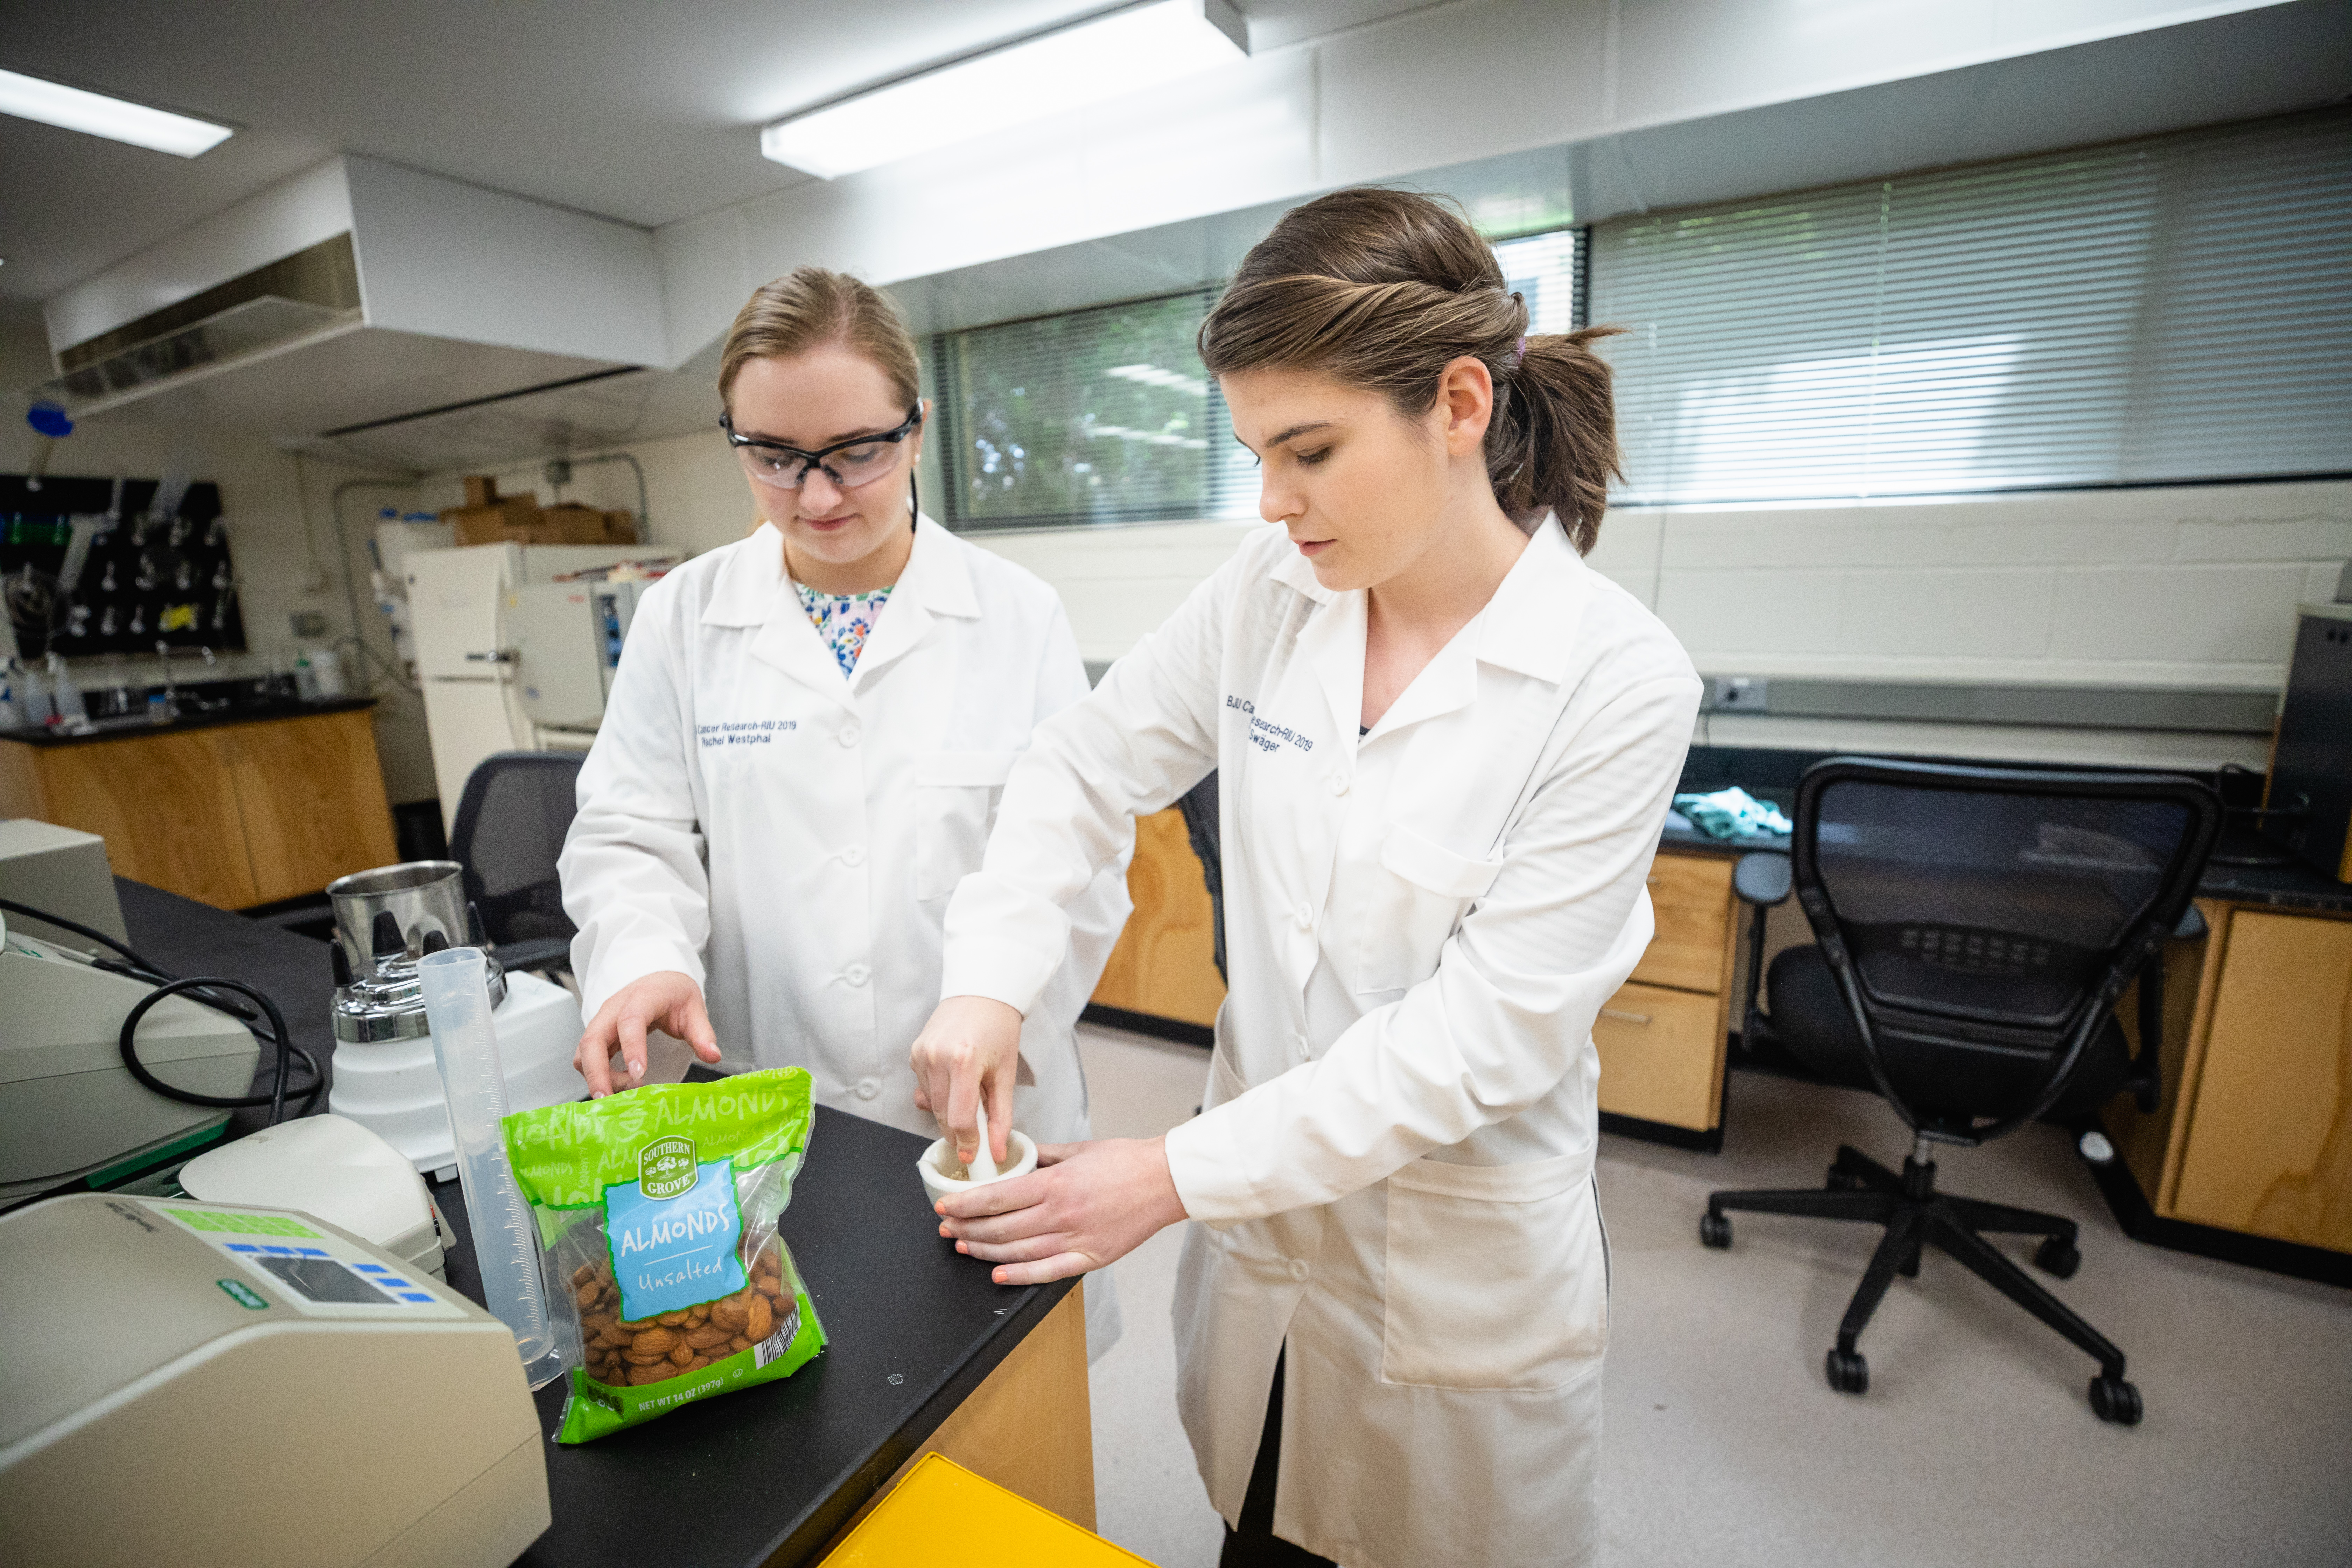 Rachel Westphal and Emily Swäger study the effects of almond extract on cancer cells